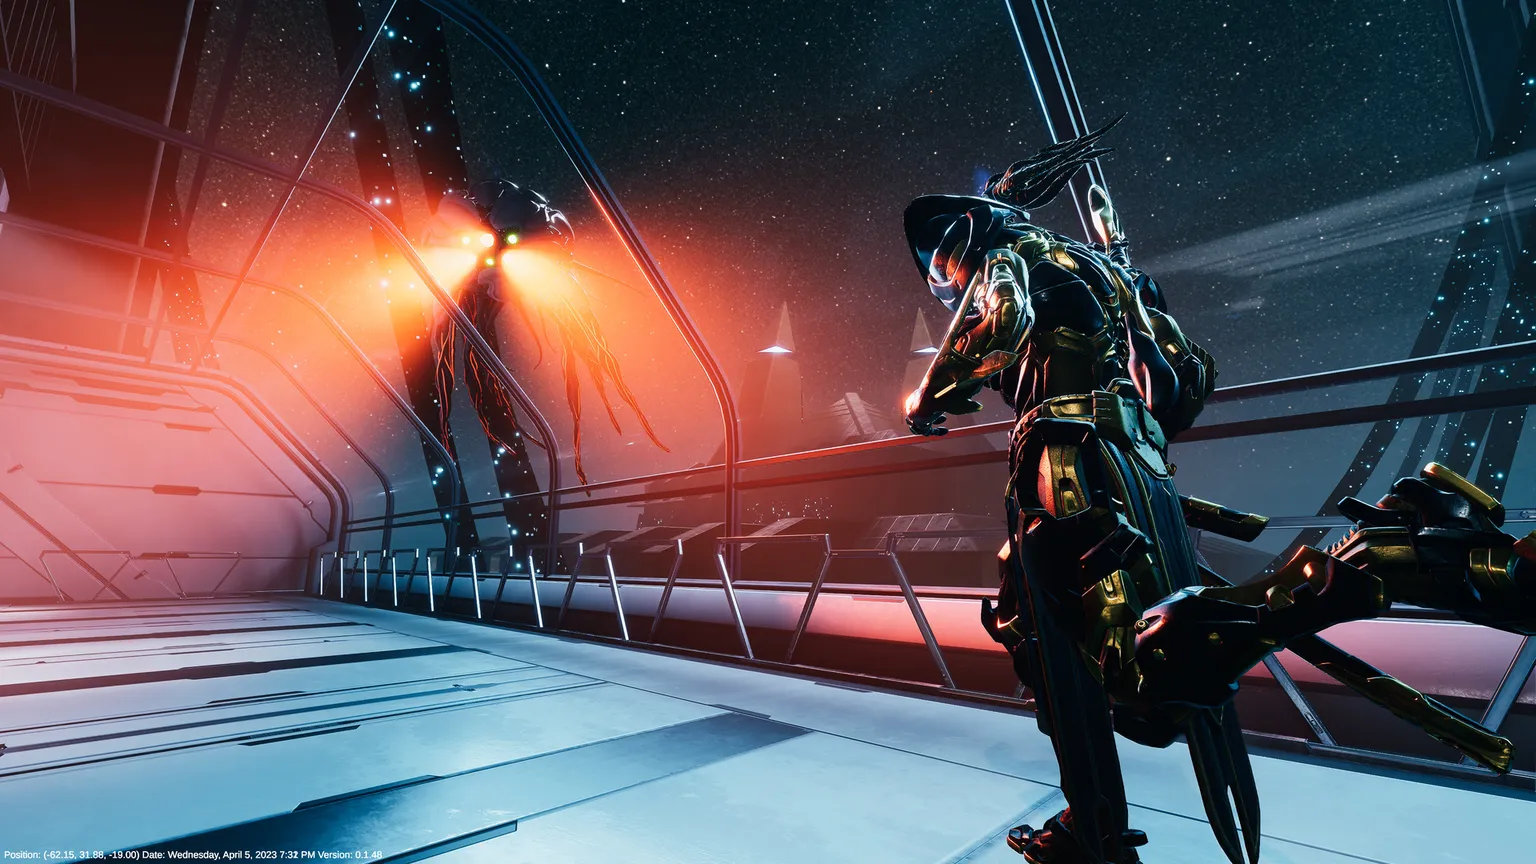 Unioverse Proving Grounds Screenshot showing Reyu in a dystopian scifi hallway with large robot drone with tentacles shining red light toward him.